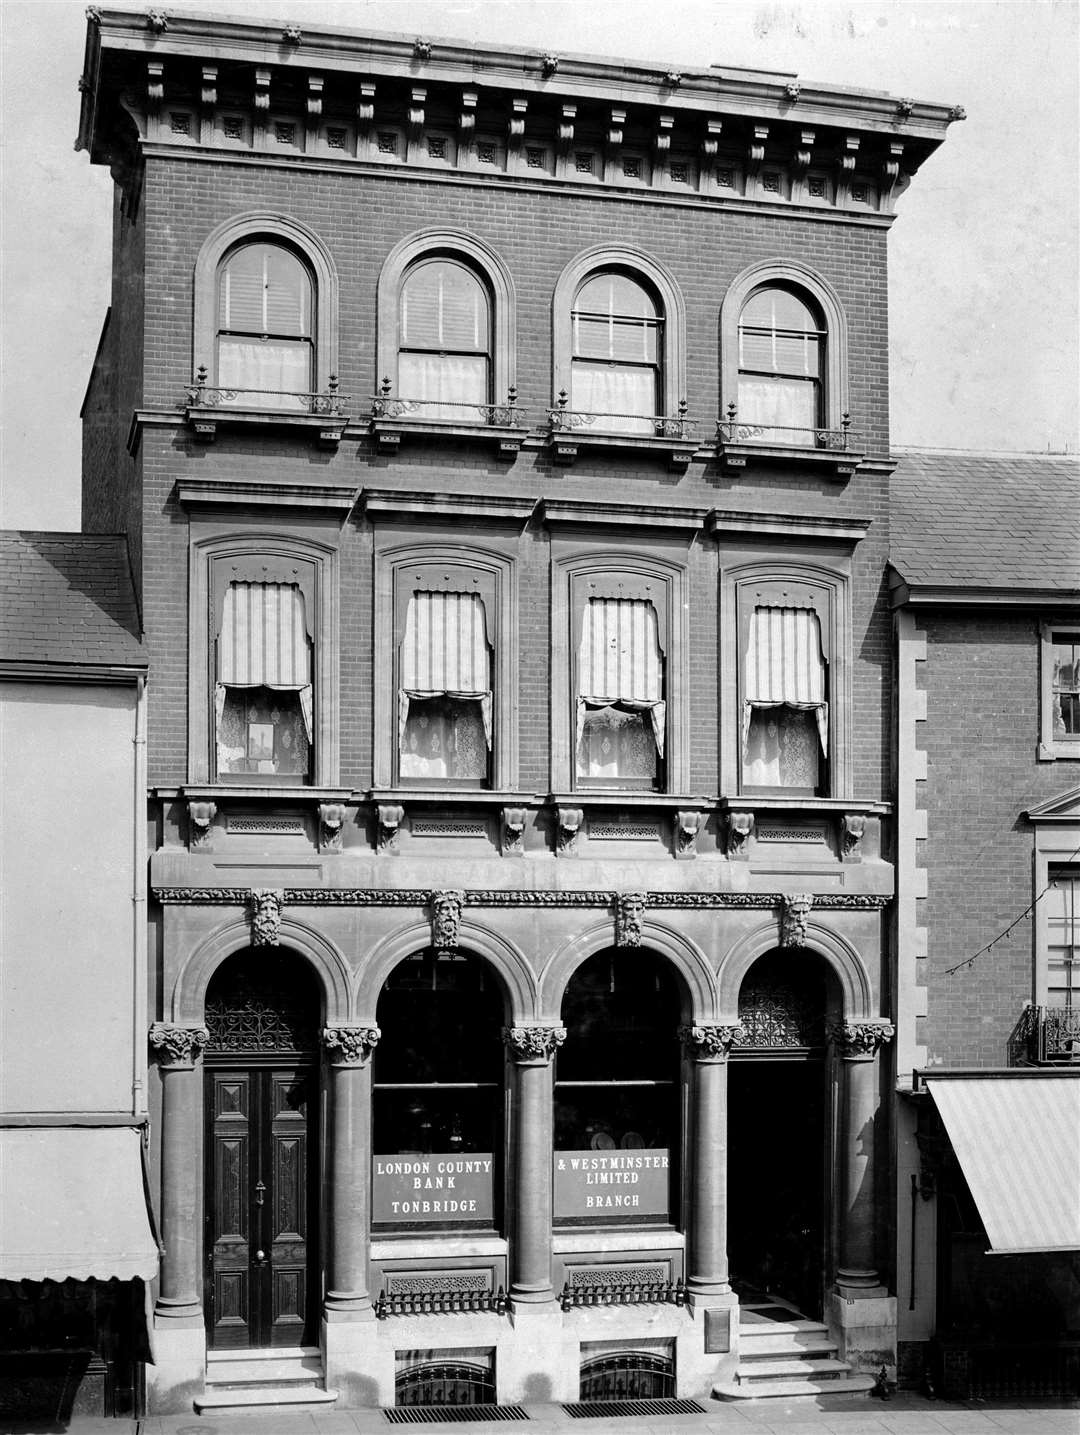 The original NatWest bank building in the town during the 1900s. Picture: Suzanne Turnbull